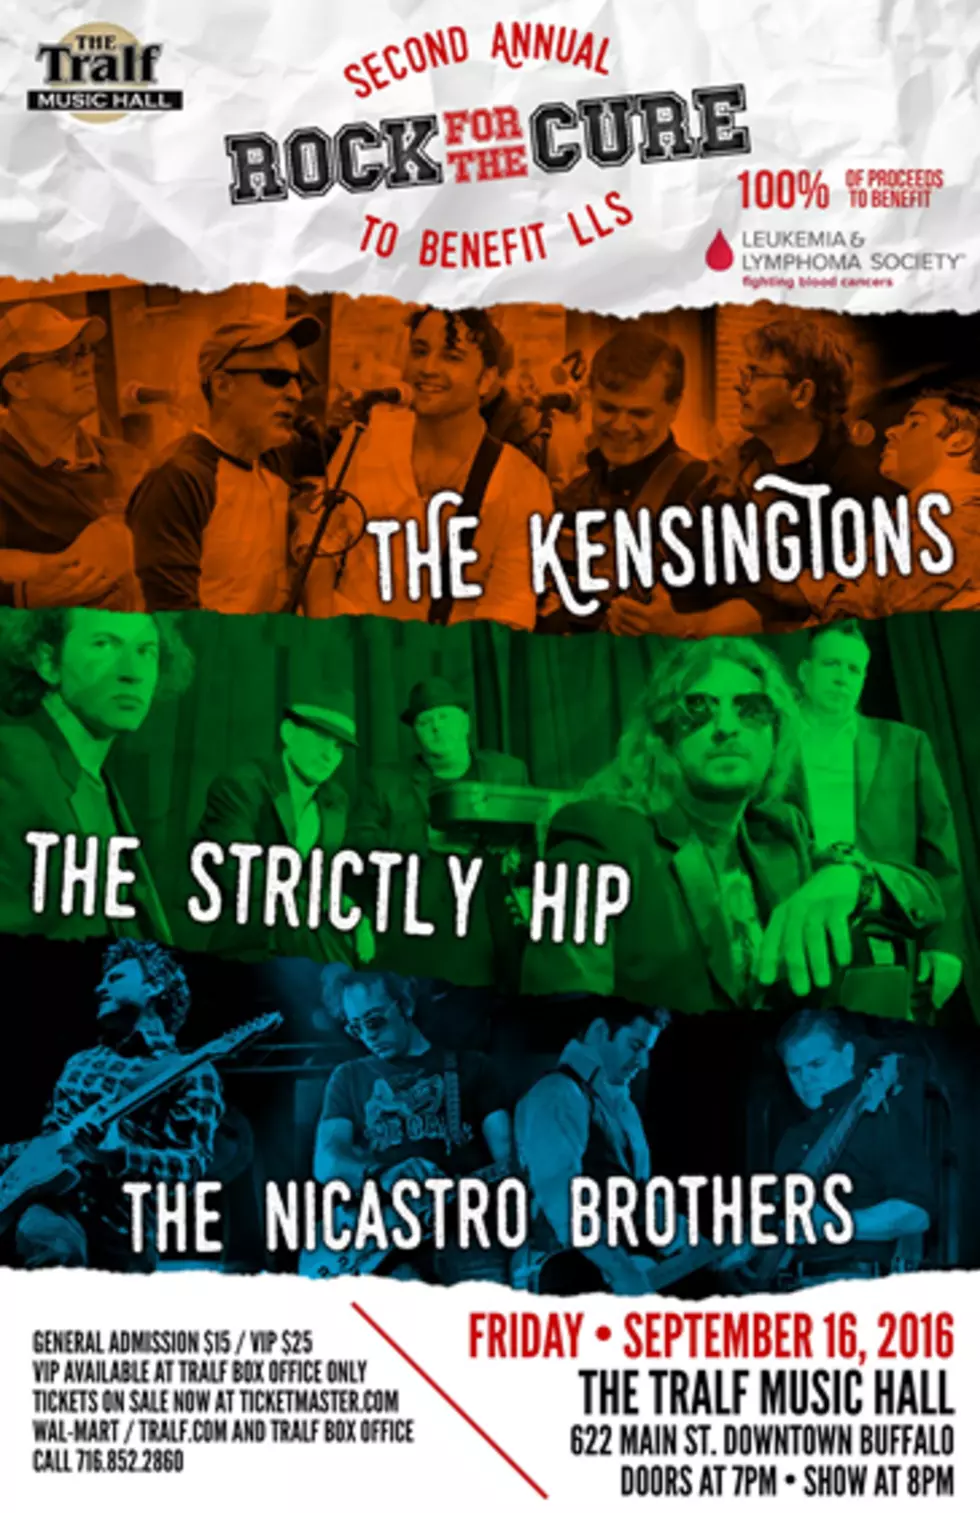 Rock for the Cure to Benefit LLS – The Kensingtons, The Strictly Hip, The Nicastro Brothers